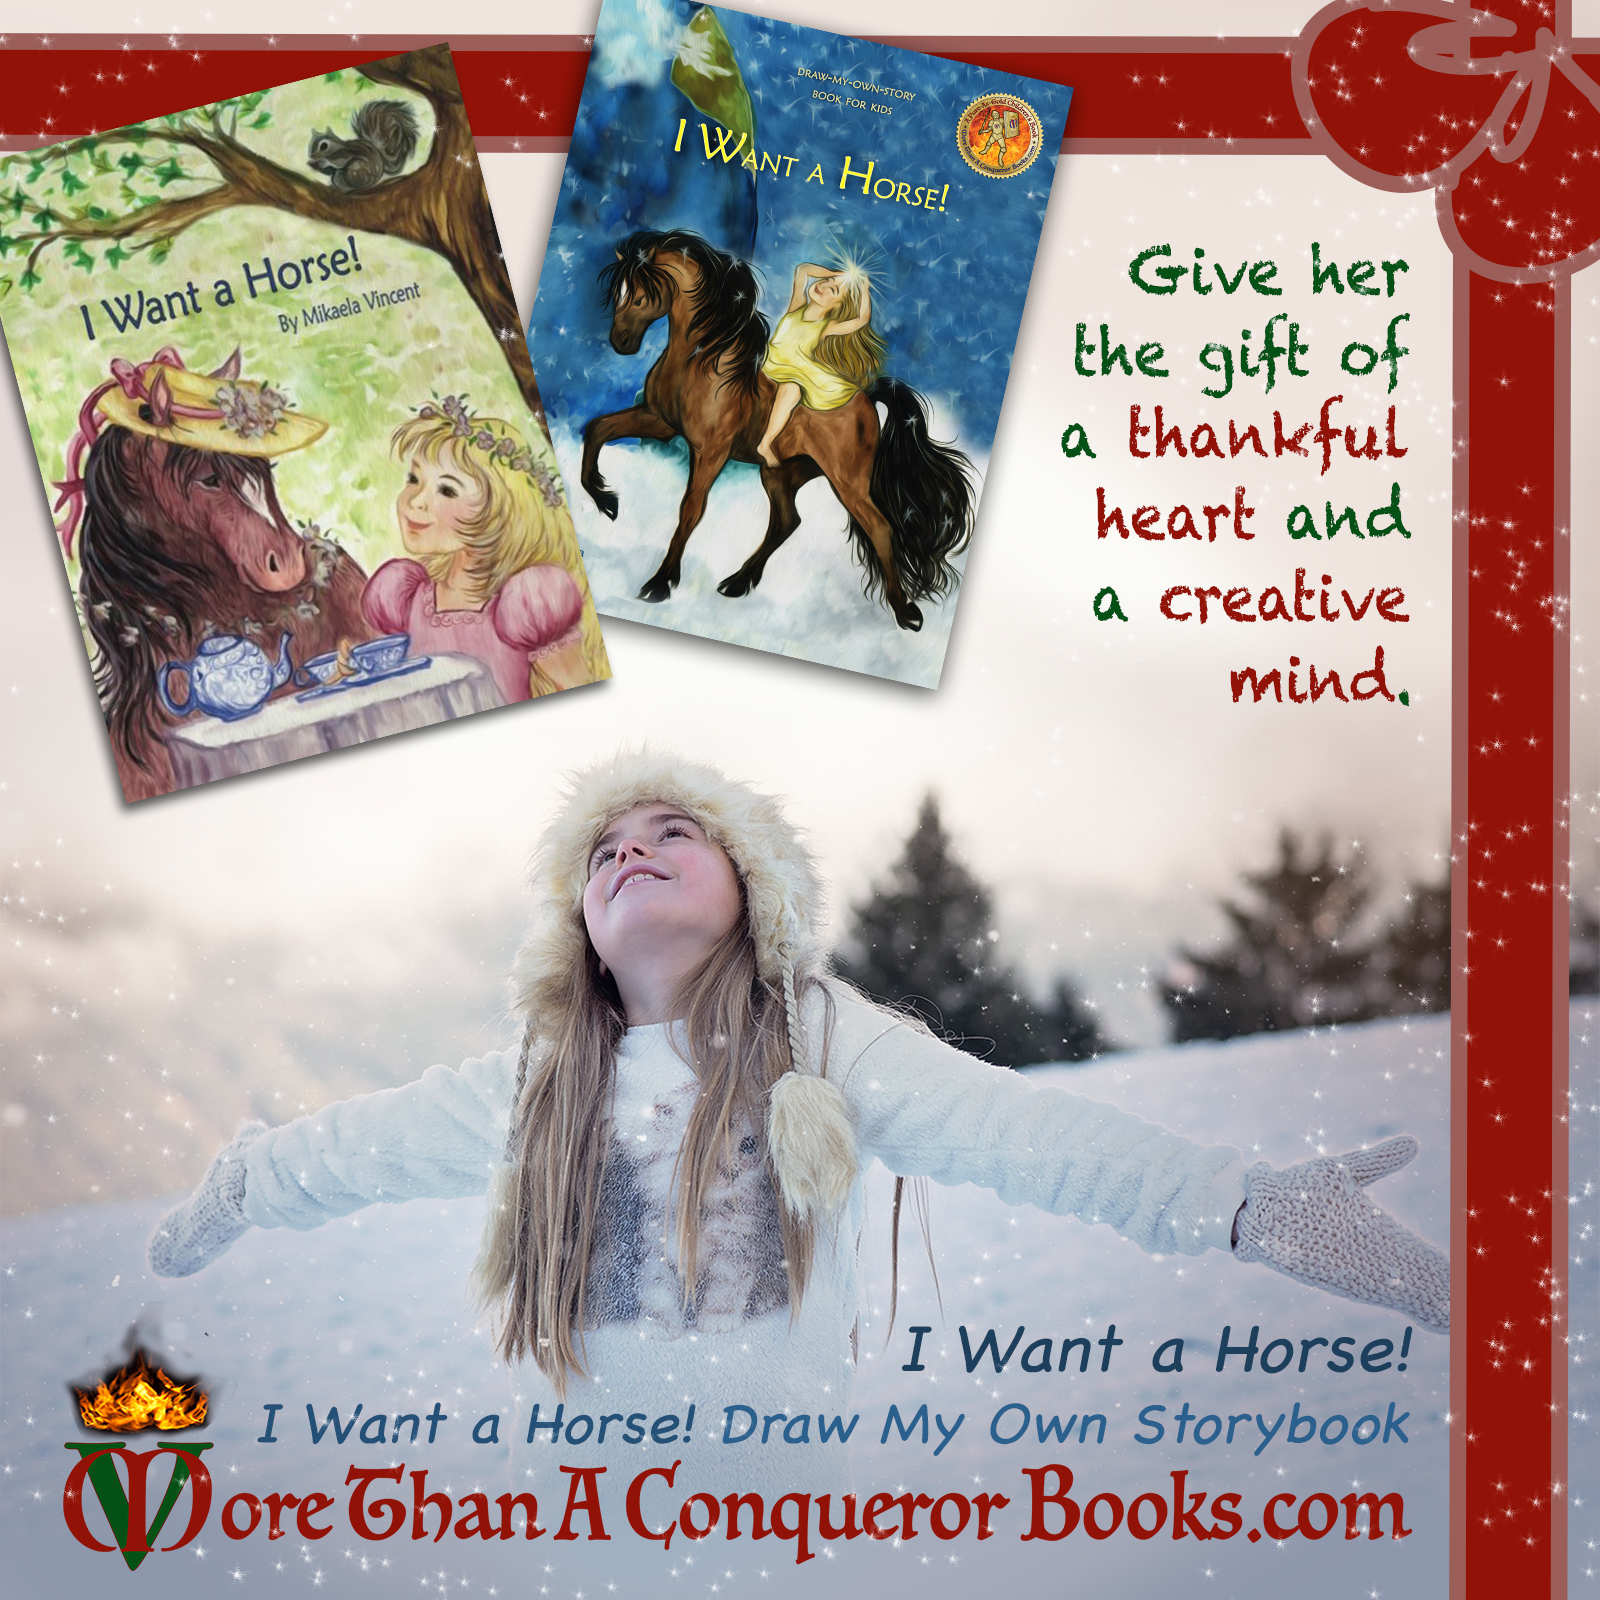 I Want a Horse!-Draw My Own Storybook-Give her the gift of a thankful heart and creative mind-Mikaela Vincent-MoreThanAConquerorBooks.jpg